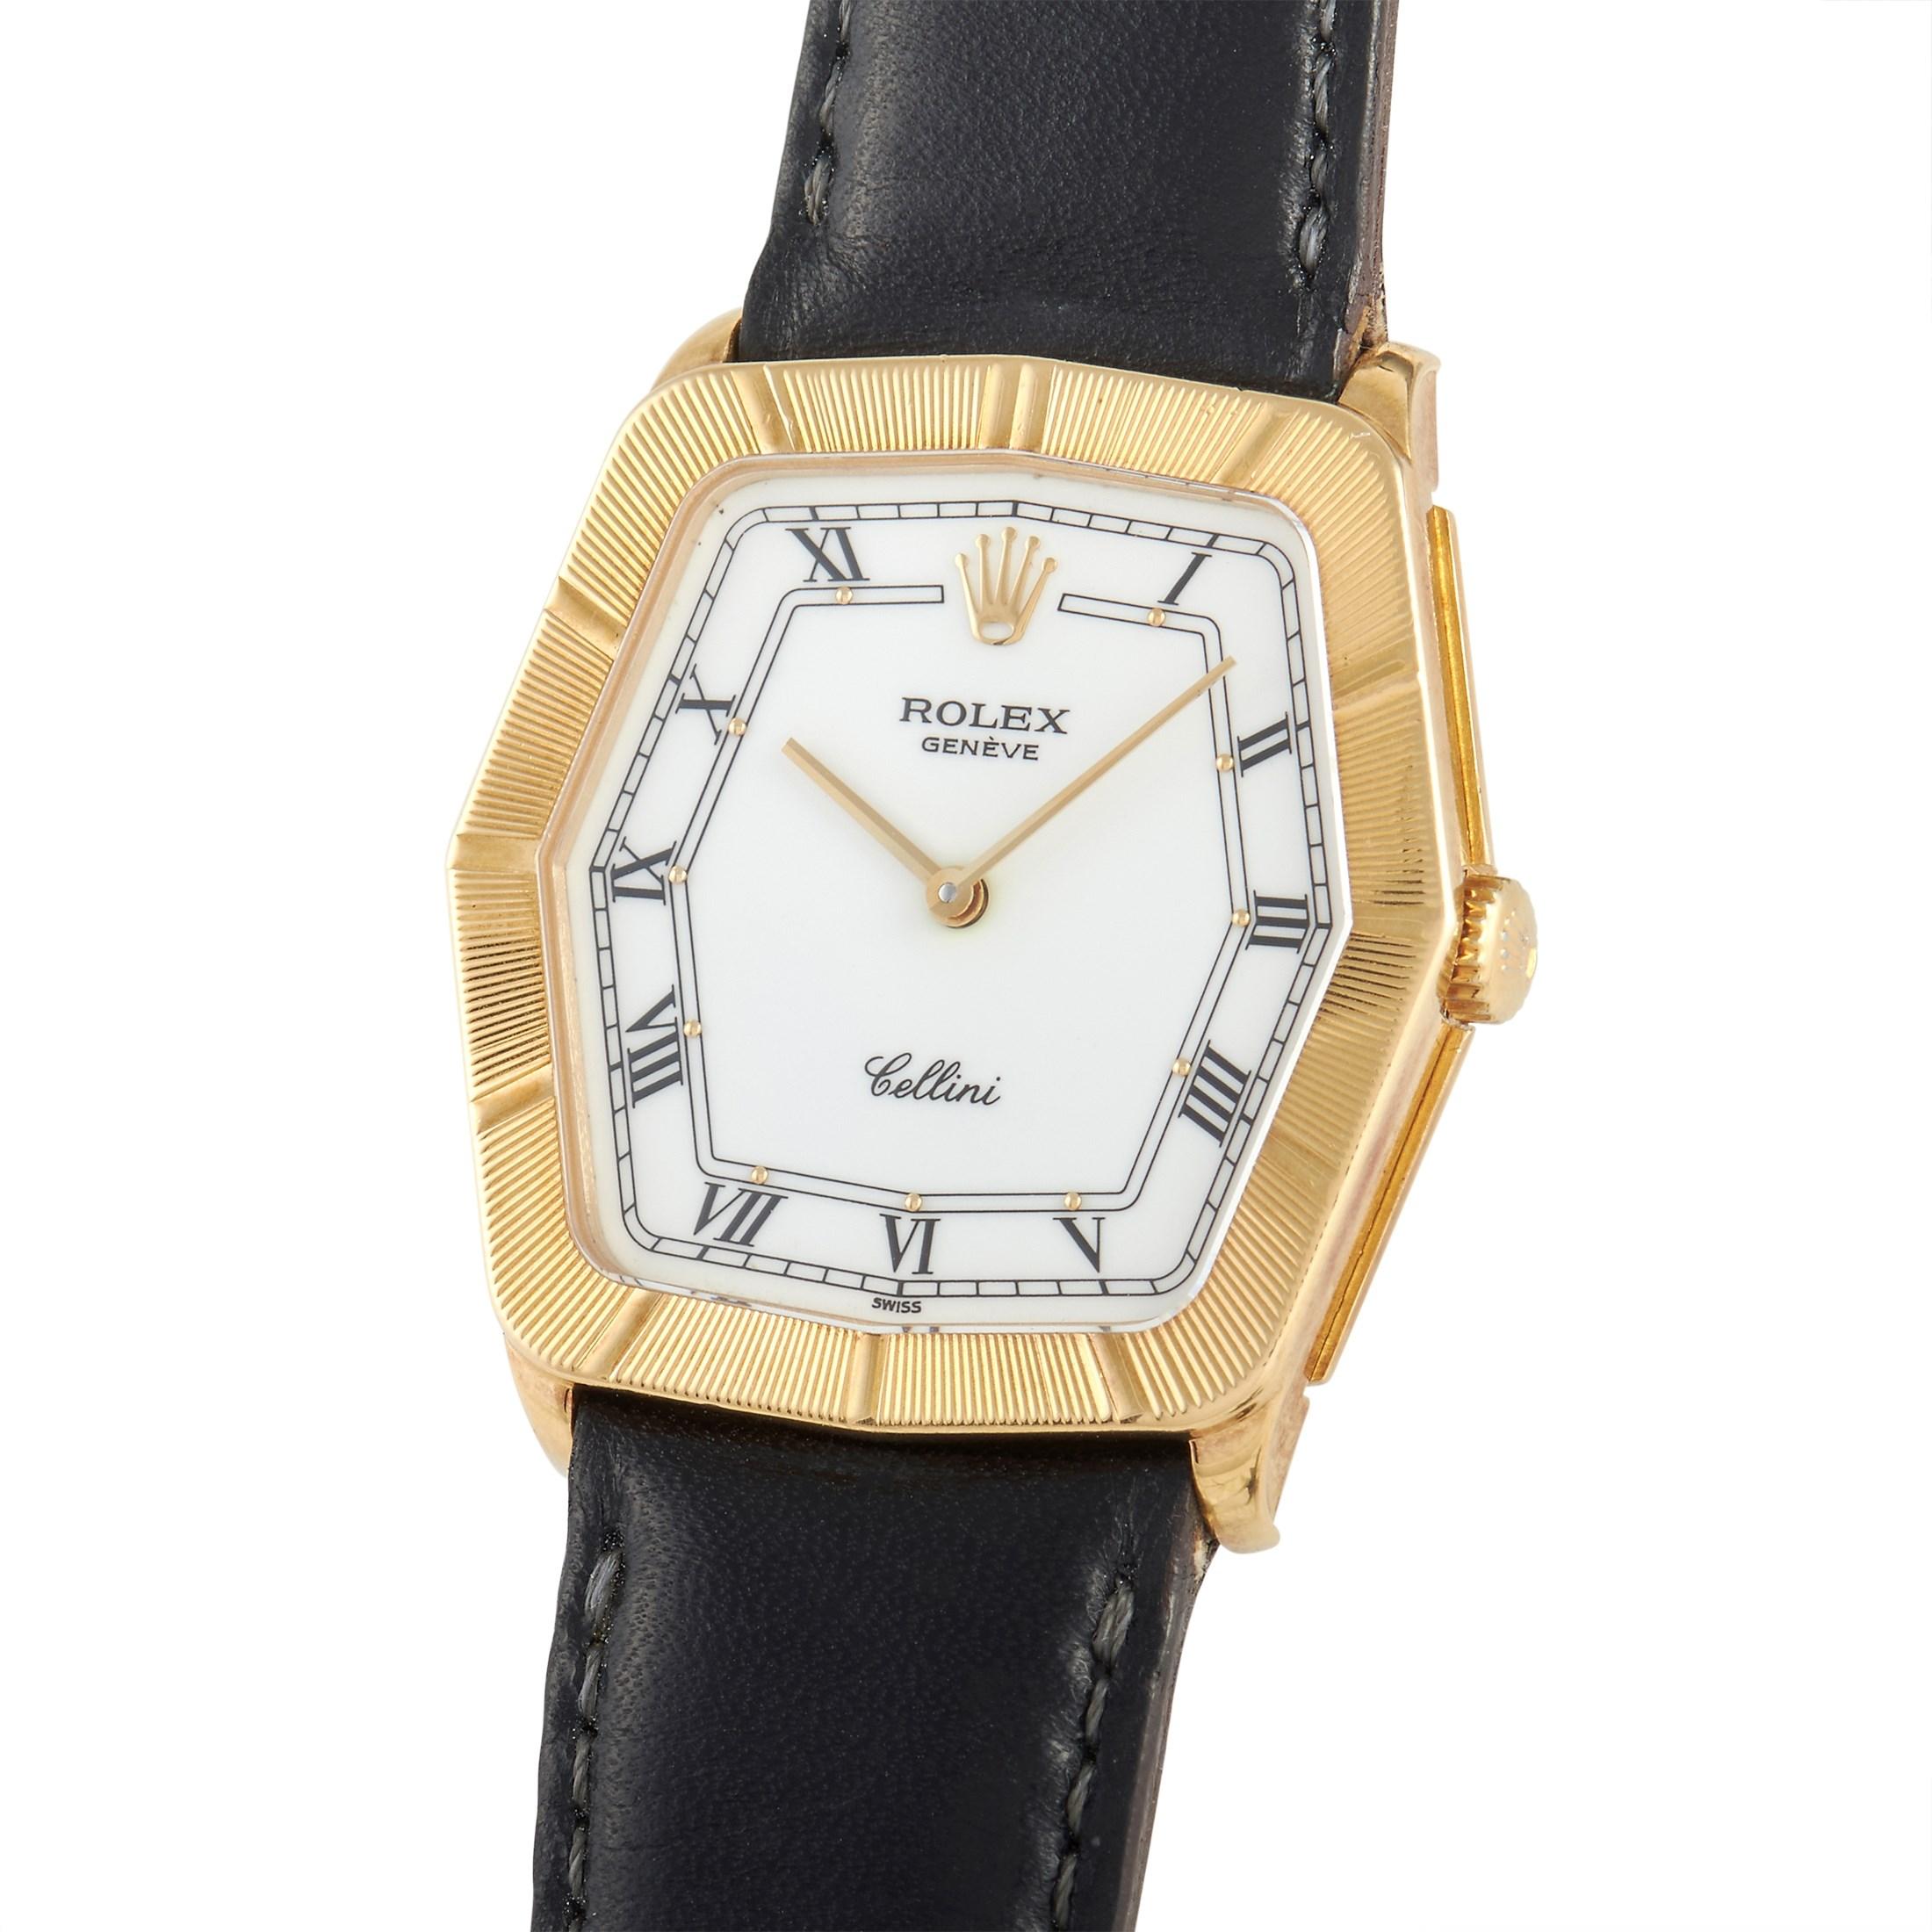 The Rolex Cellini Yellow Gold Watch, reference number 4170/8, possesses a certain sense of upscale sophistication. 

On this luxury timepiece, a hexagonal 31mm case crafted from 18K Yellow Gold is elegantly accented by a gold textured bezel. The